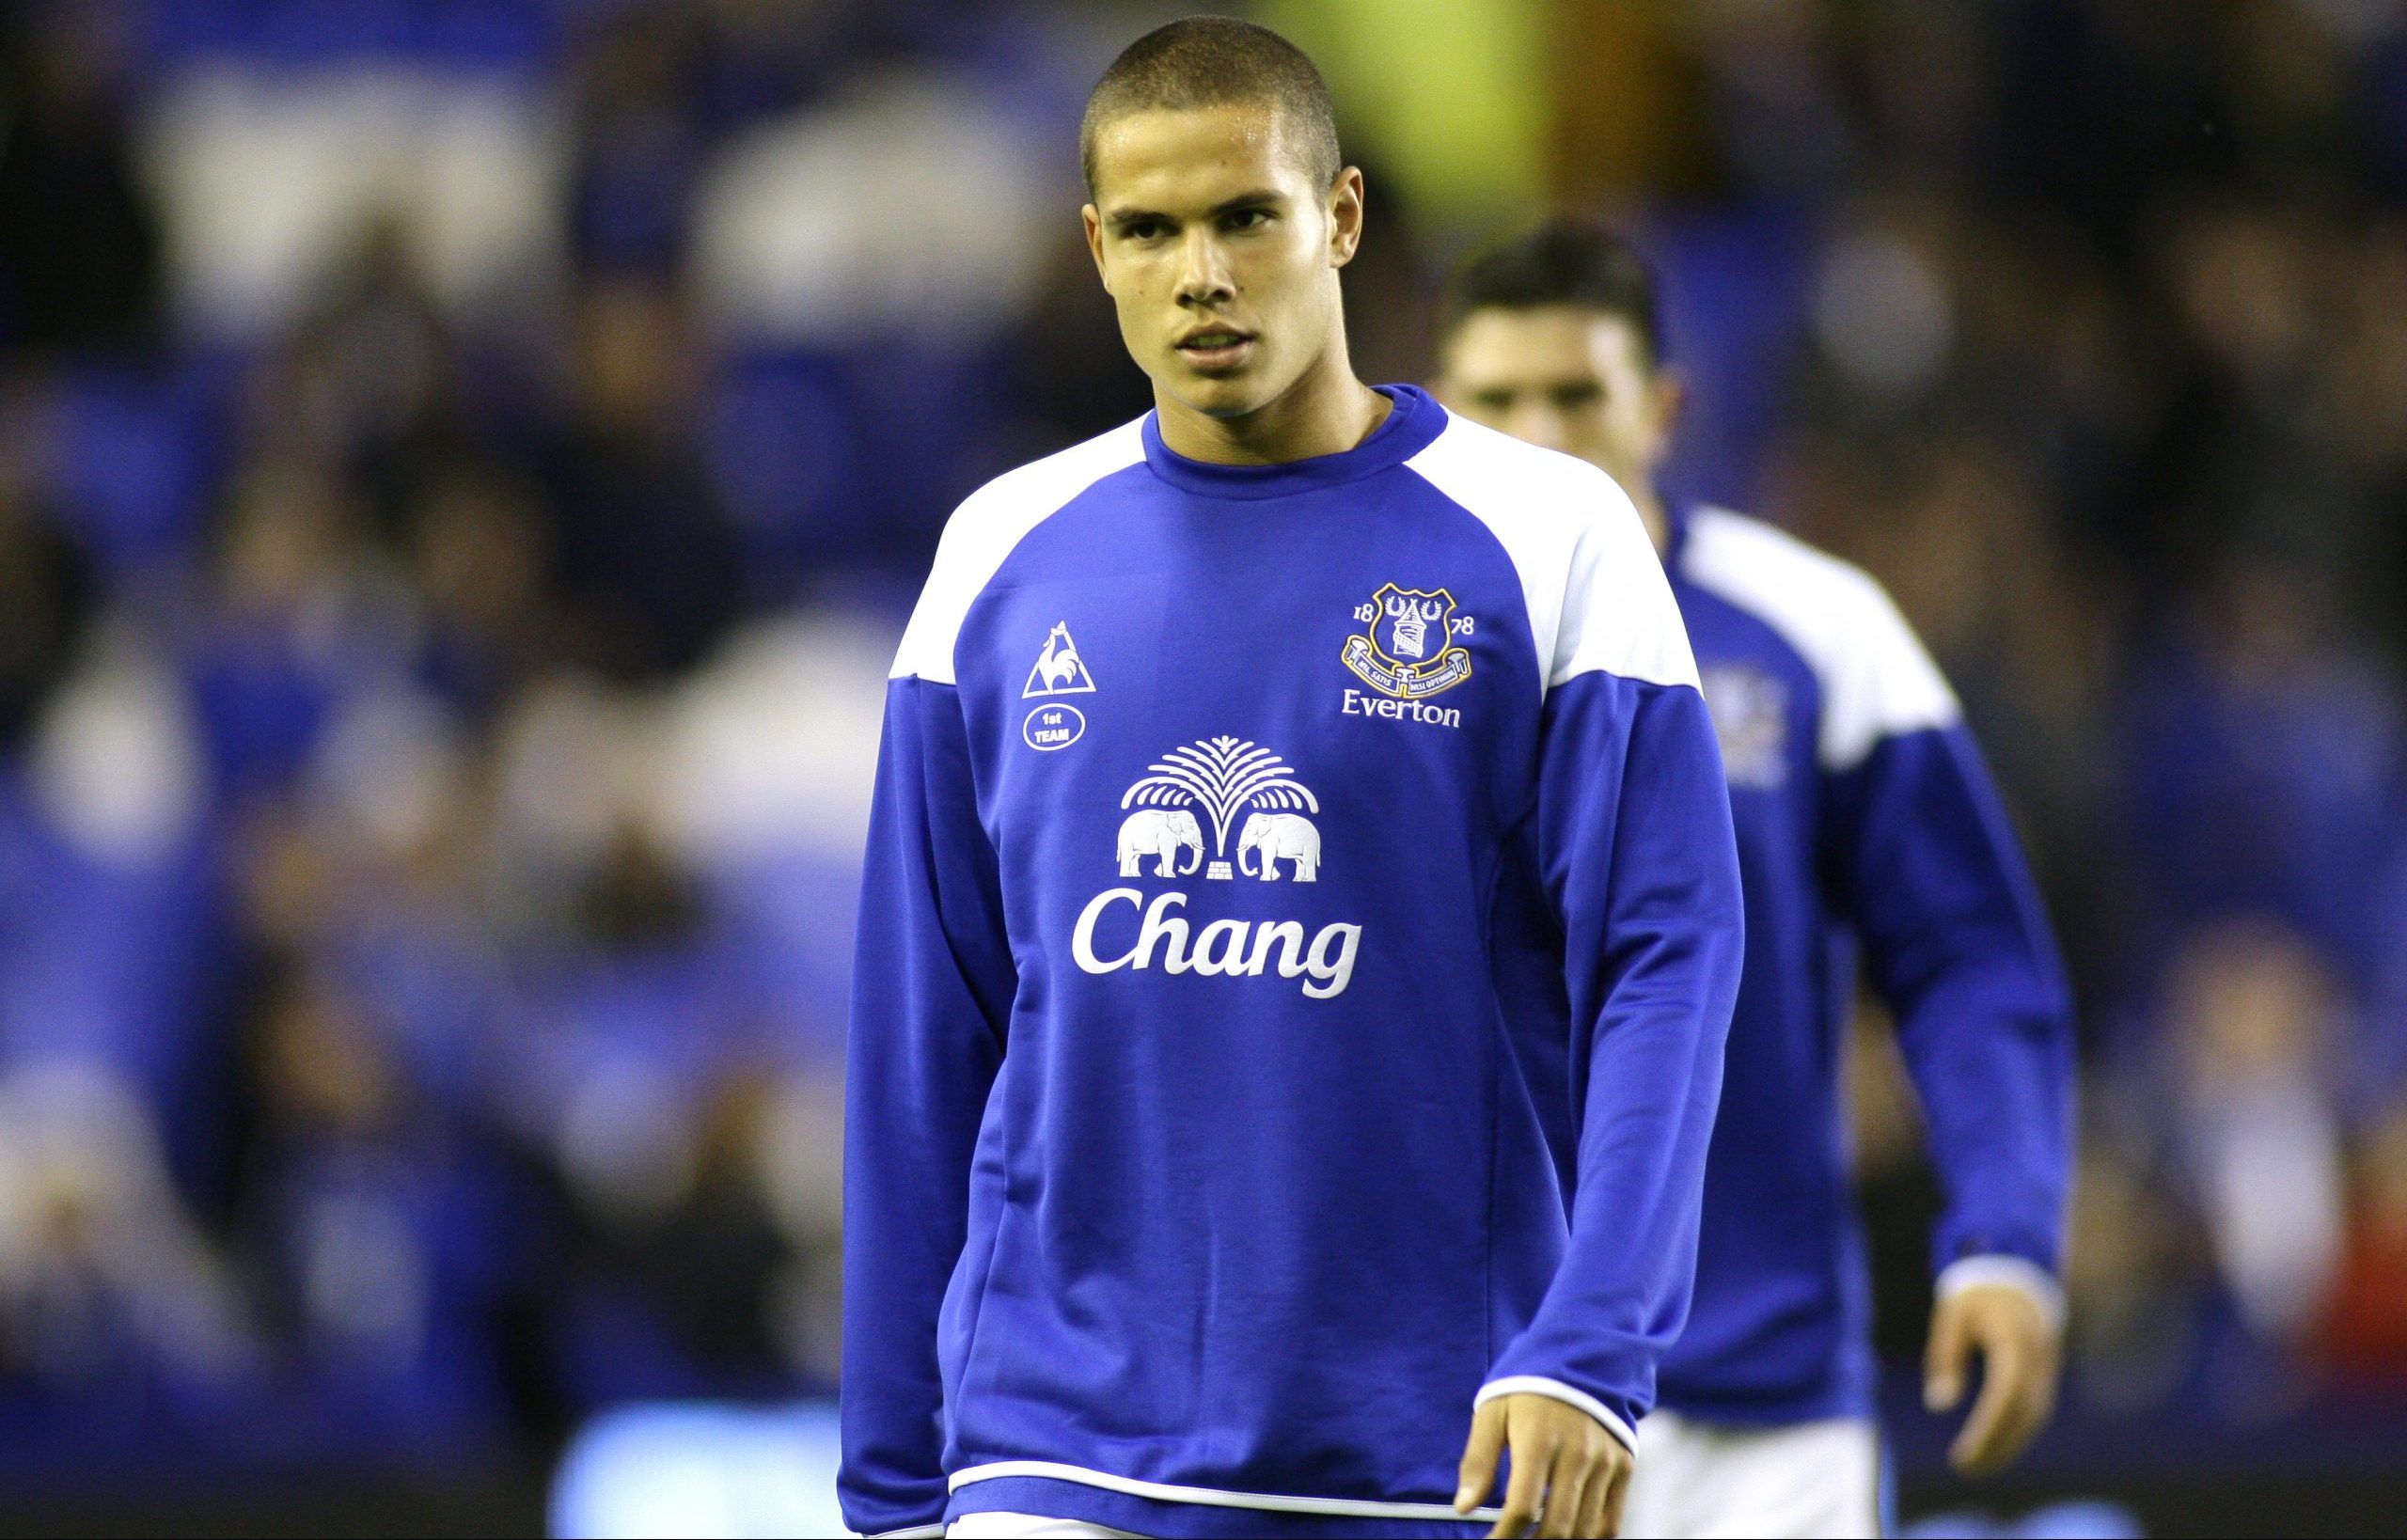 Jack-Rodwell-Everton-Manchester-City-Sunderland-Academy-Potential-Wasted